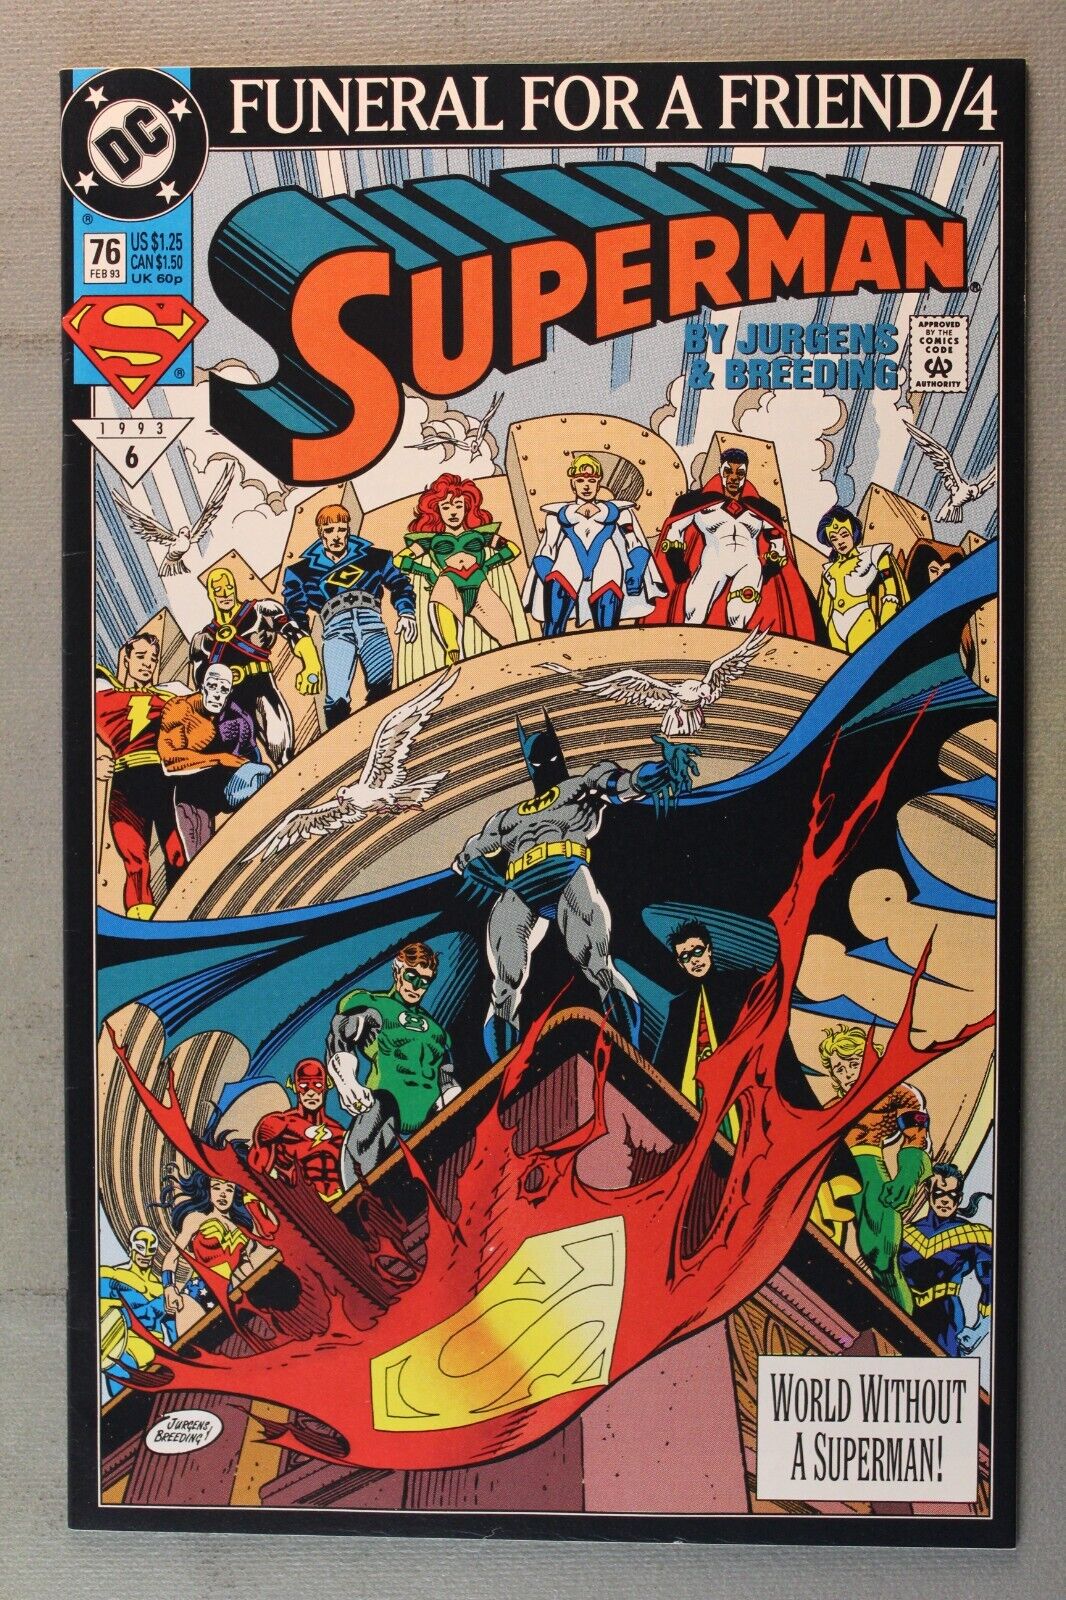 Superman #6 1993 Funeral For A Friend/4 \